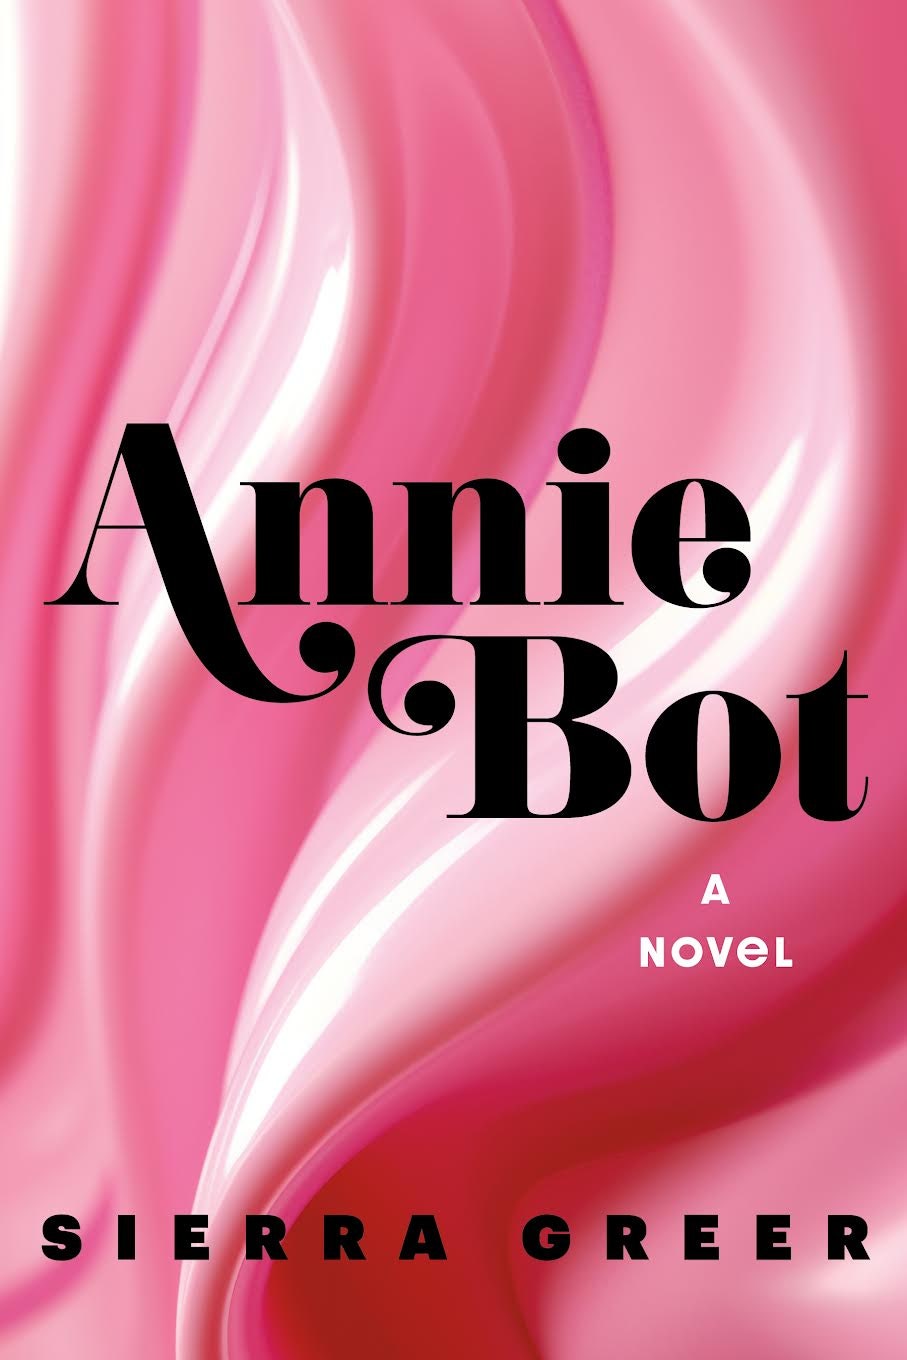 <p>After I finished <em>Annie Bot</em>, I wanted to discuss it so badly with other women that I not only wrote about it for <em>Glamour</em> (read my interview with author Sierra Greer <a href="https://www.glamour.com/story/annie-bot-novel-what-happens-when-a-sex-robot-realizes-her-worth?mbid=synd_msn_rss&utm_source=msn&utm_medium=syndication">here</a>), but I suggested it for my very own book club. There's just so much to unpack in this novel.</p> <p>A brilliantly crafted examination of abusive relationships and patriarchal power, Greer tells her story through a futuristic lens, and the propulsive plot keeps the reader entertained as she makes her point. Annie is a Stella, an AI robot that can be purchased by humans for about the price of a luxury car in order to fill a void in their household. Stellas can be nannies or housekeepers, but Annie is set to “Cuddle Bunny” mode, meaning her primary task is being a sexual and romantic partner to her owner, Doug. When Annie is changed to a different mode that allows her to learn from her environment though, she begins to question her own value and worth. You won't be able to stop thinking about Annie, her world, and how uncomfortably real the whole thing feels.</p> <p><em>-Stephanie McNeal, senior editor</em></p> <p><em>Out now</em></p><p>Sign up for today’s biggest stories, from pop culture to politics.</p><a href="https://www.glamour.com/newsletter/news?sourceCode=msnsend">Sign Up</a>